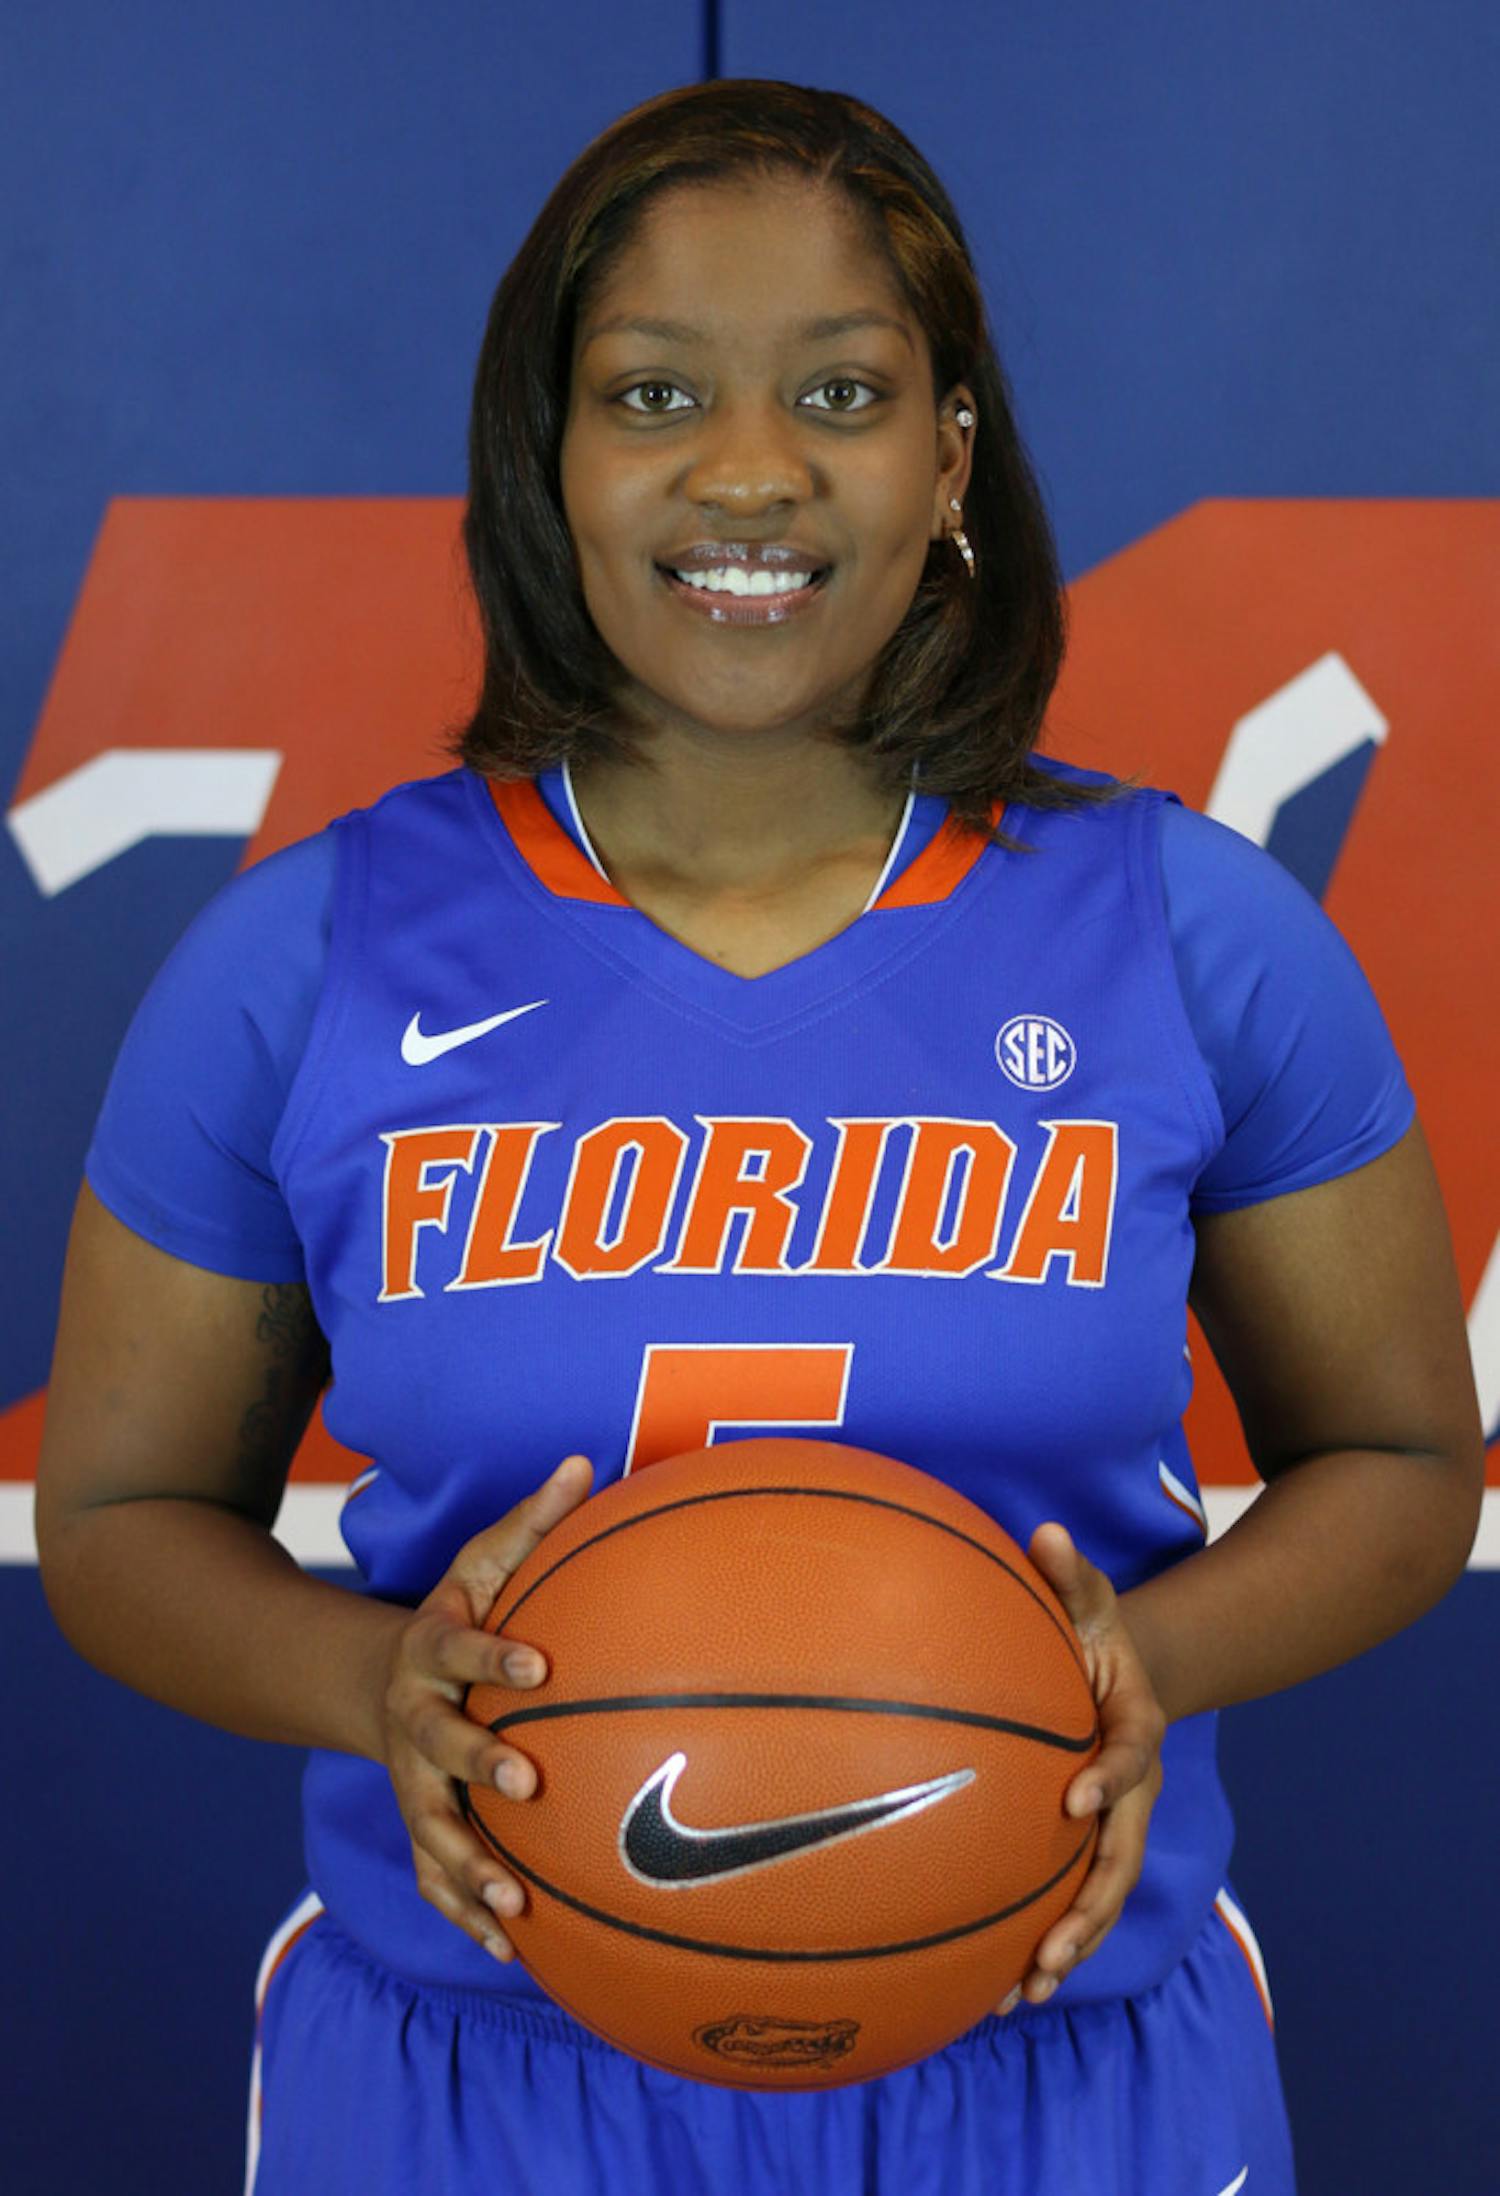 Sophomore Antoinette Bannister poses for a photo during Florida’s basketball media day.